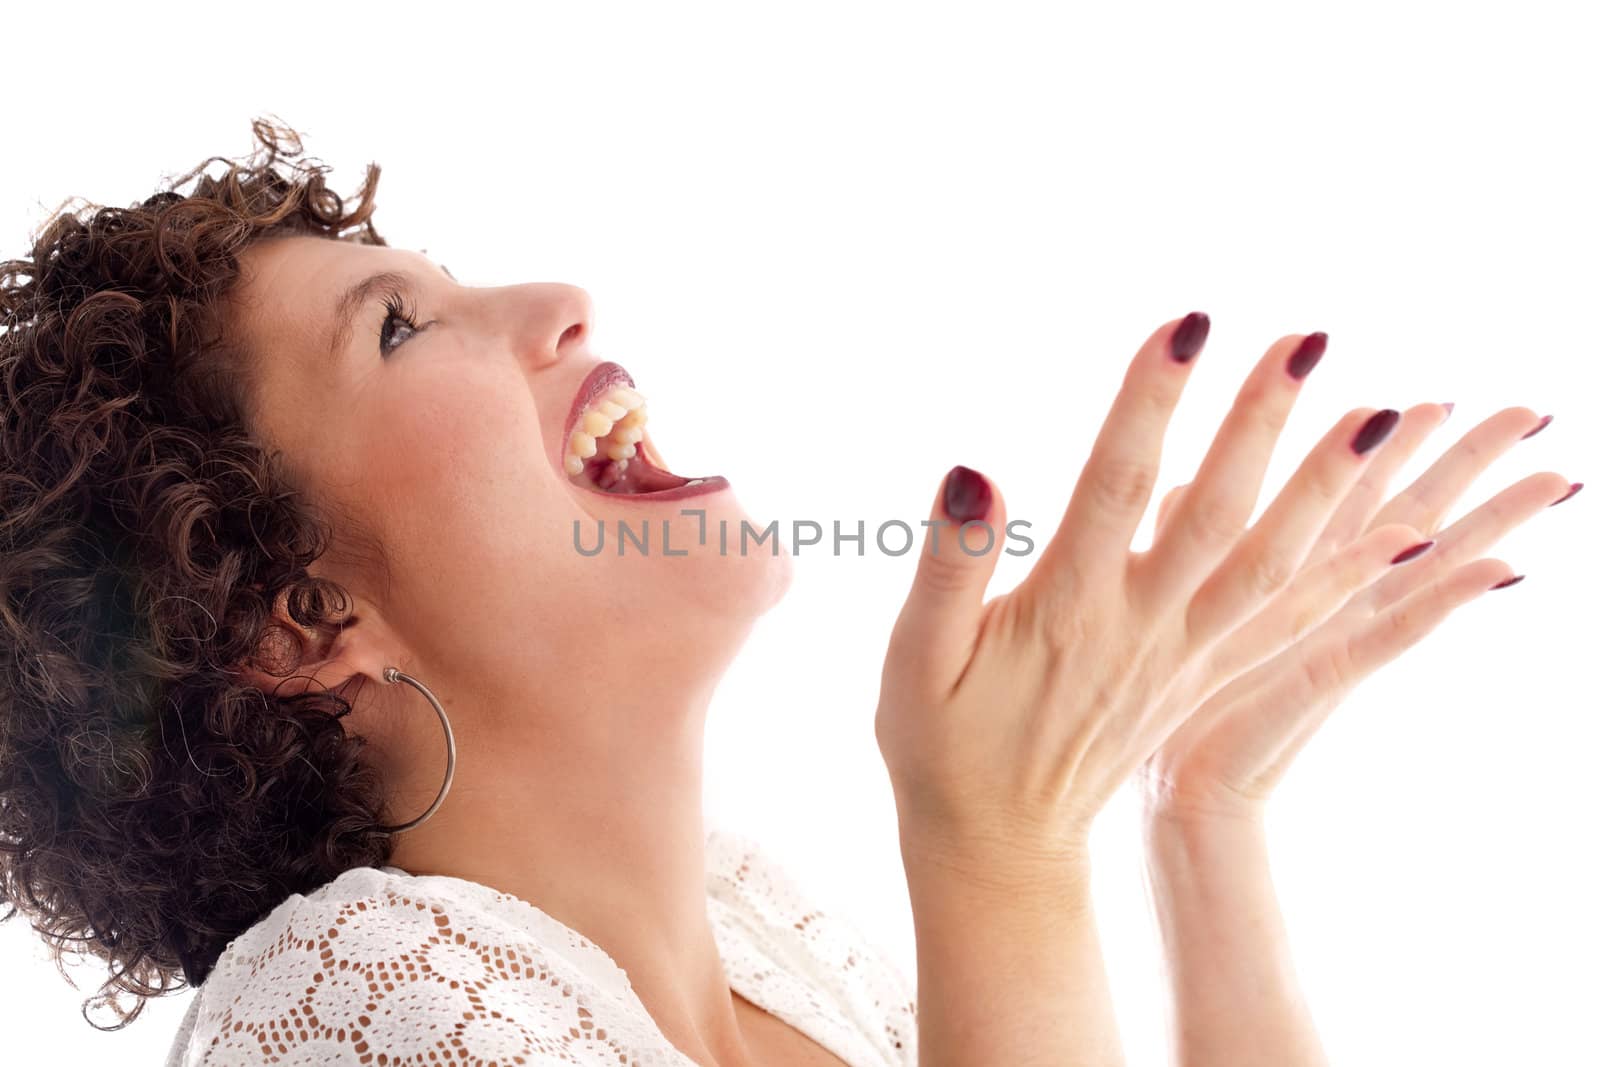 Pretty brunette standing with an excited look on her face and her hands spread open as if to catch something